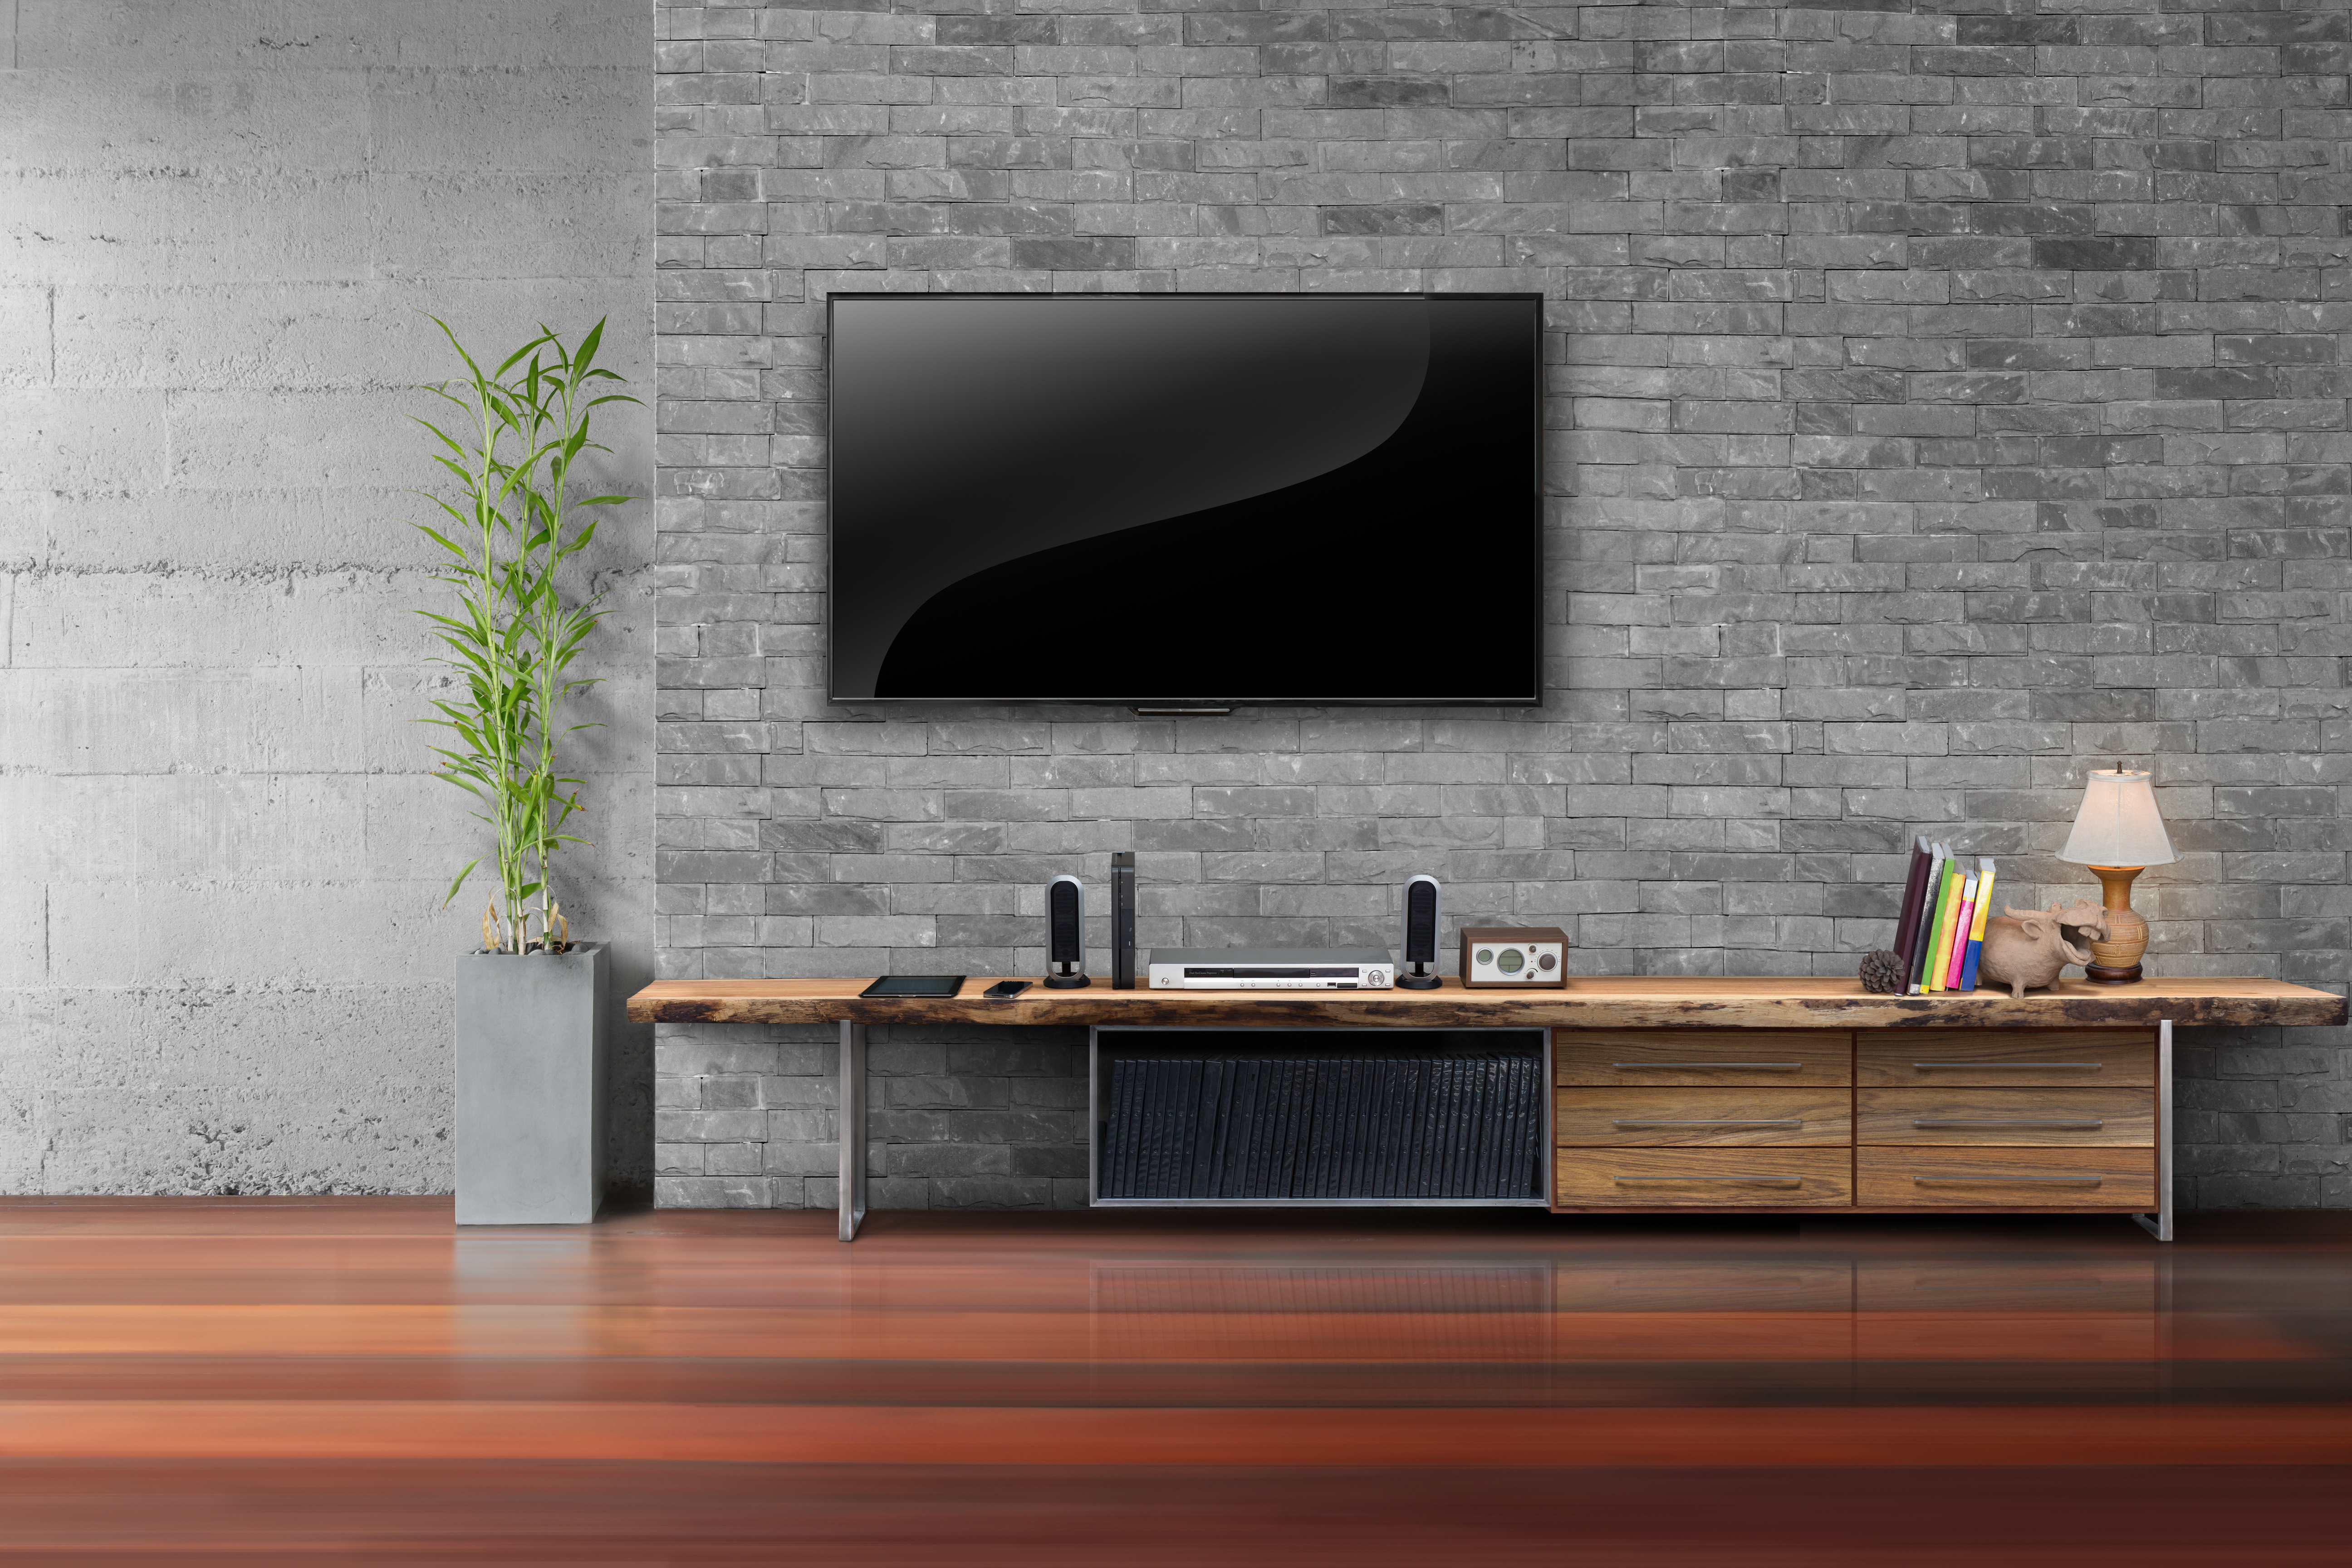 DIY Tricks to Hide TV Wires Without Cutting the Wall   HomeLane Blog